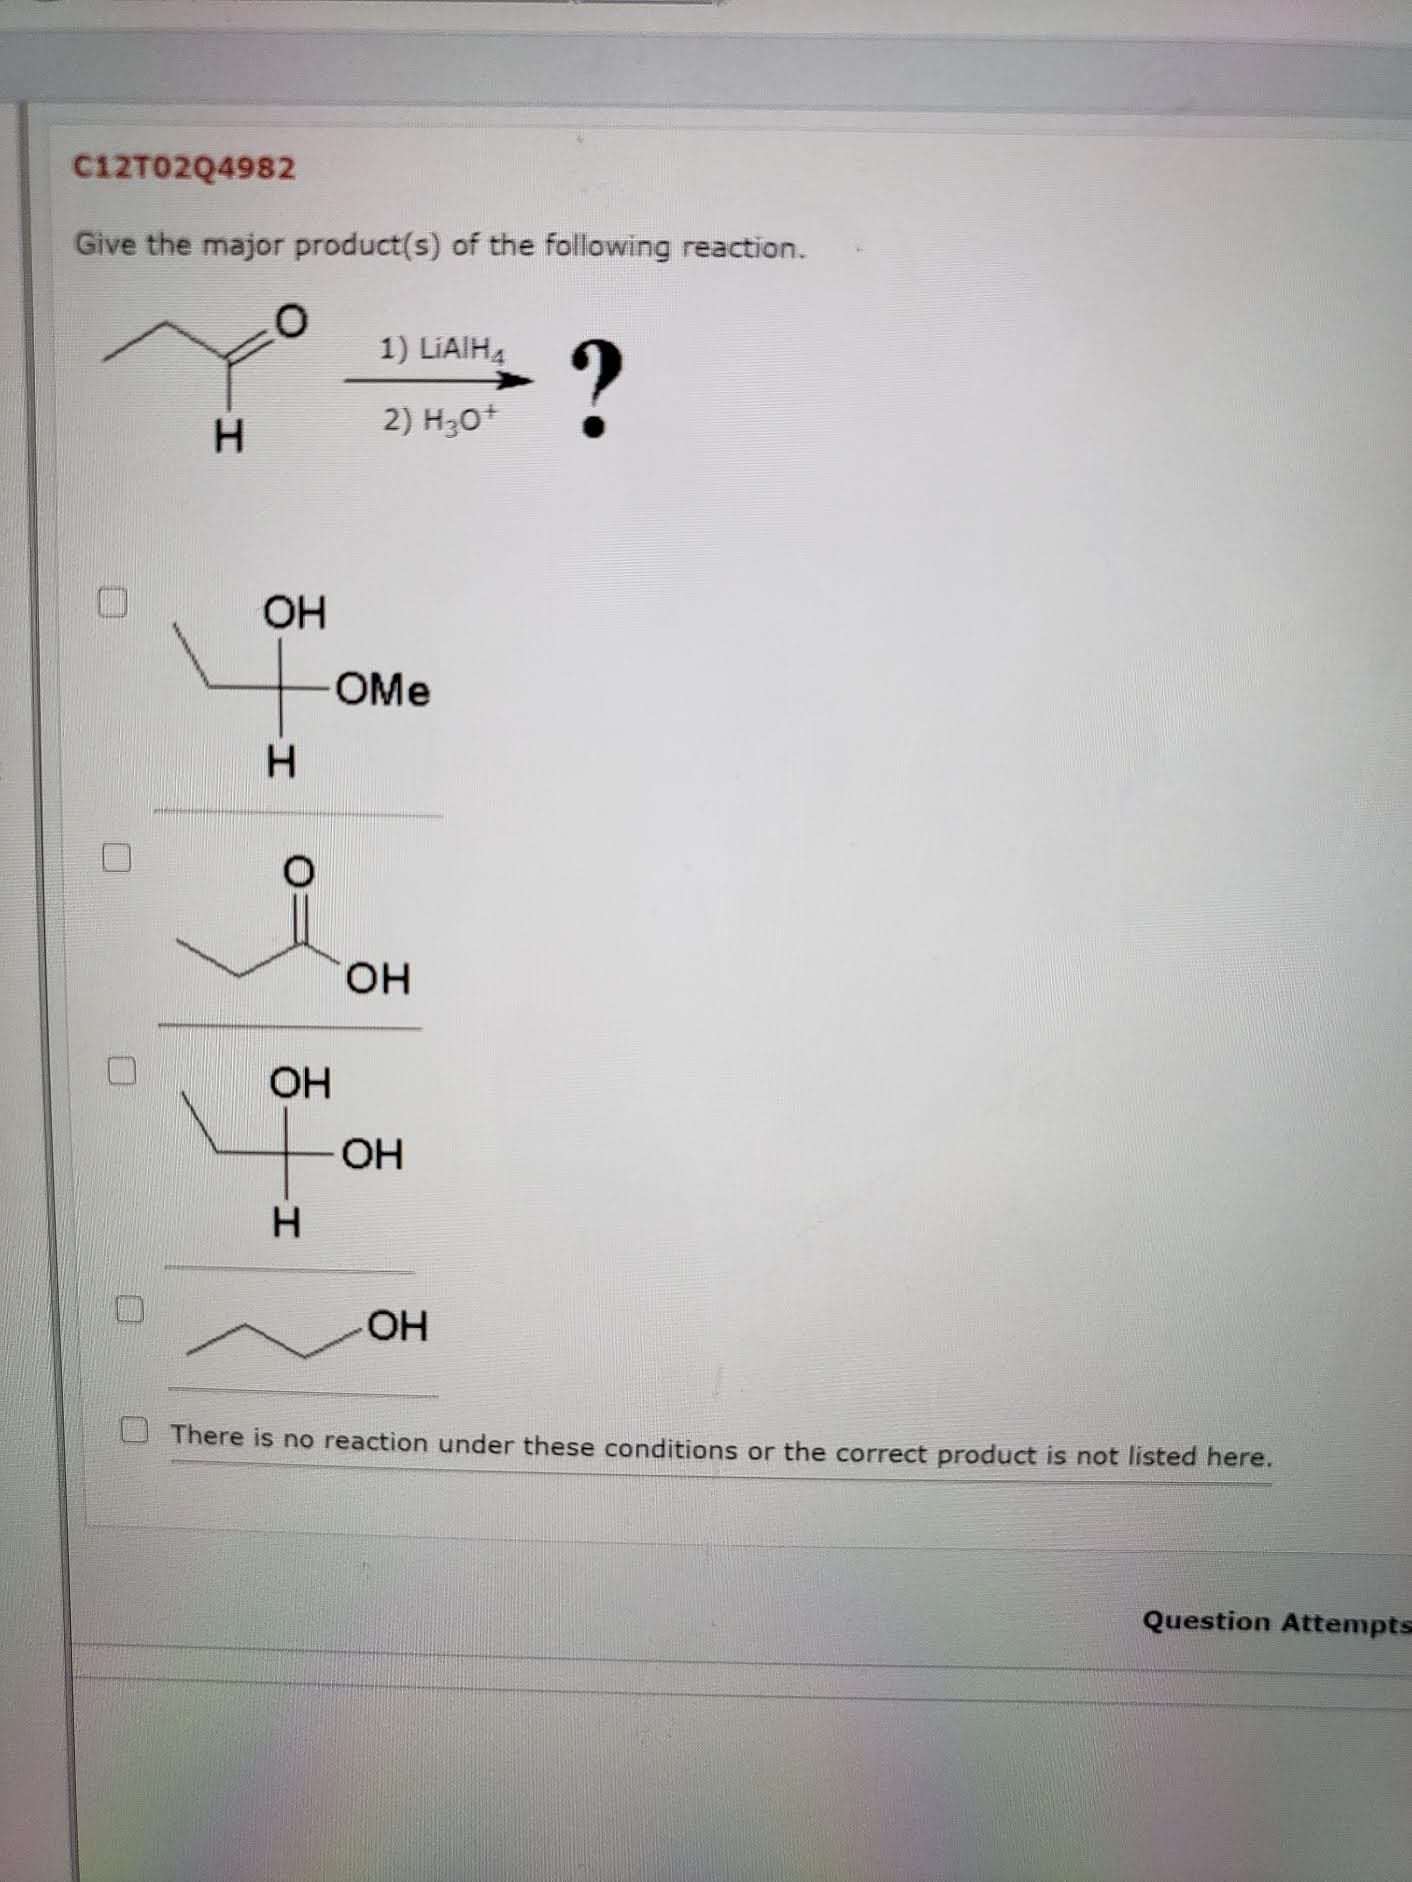 Give the major product(s) of the following reaction.
1) LIAIH4
?
2) H3O+
OH
OMe
H.
HO.
OH
OH
H
HO-
There is no reaction under these conditions or the correct product is not listed here.
